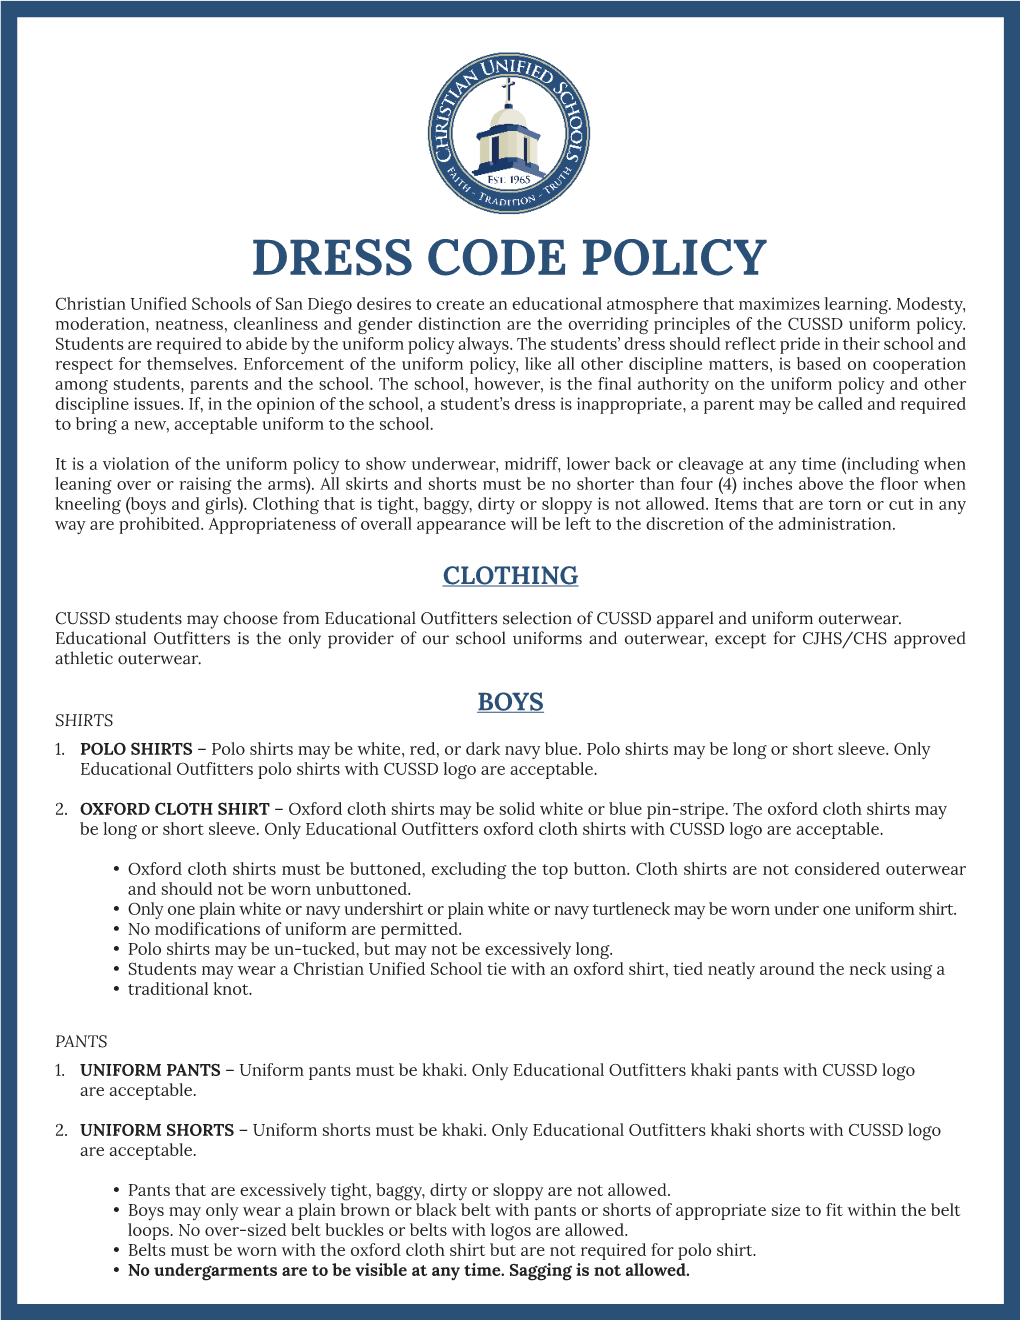 DRESS CODE POLICY Christian Unified Schools of San Diego Desires to Create an Educational Atmosphere That Maximizes Learning